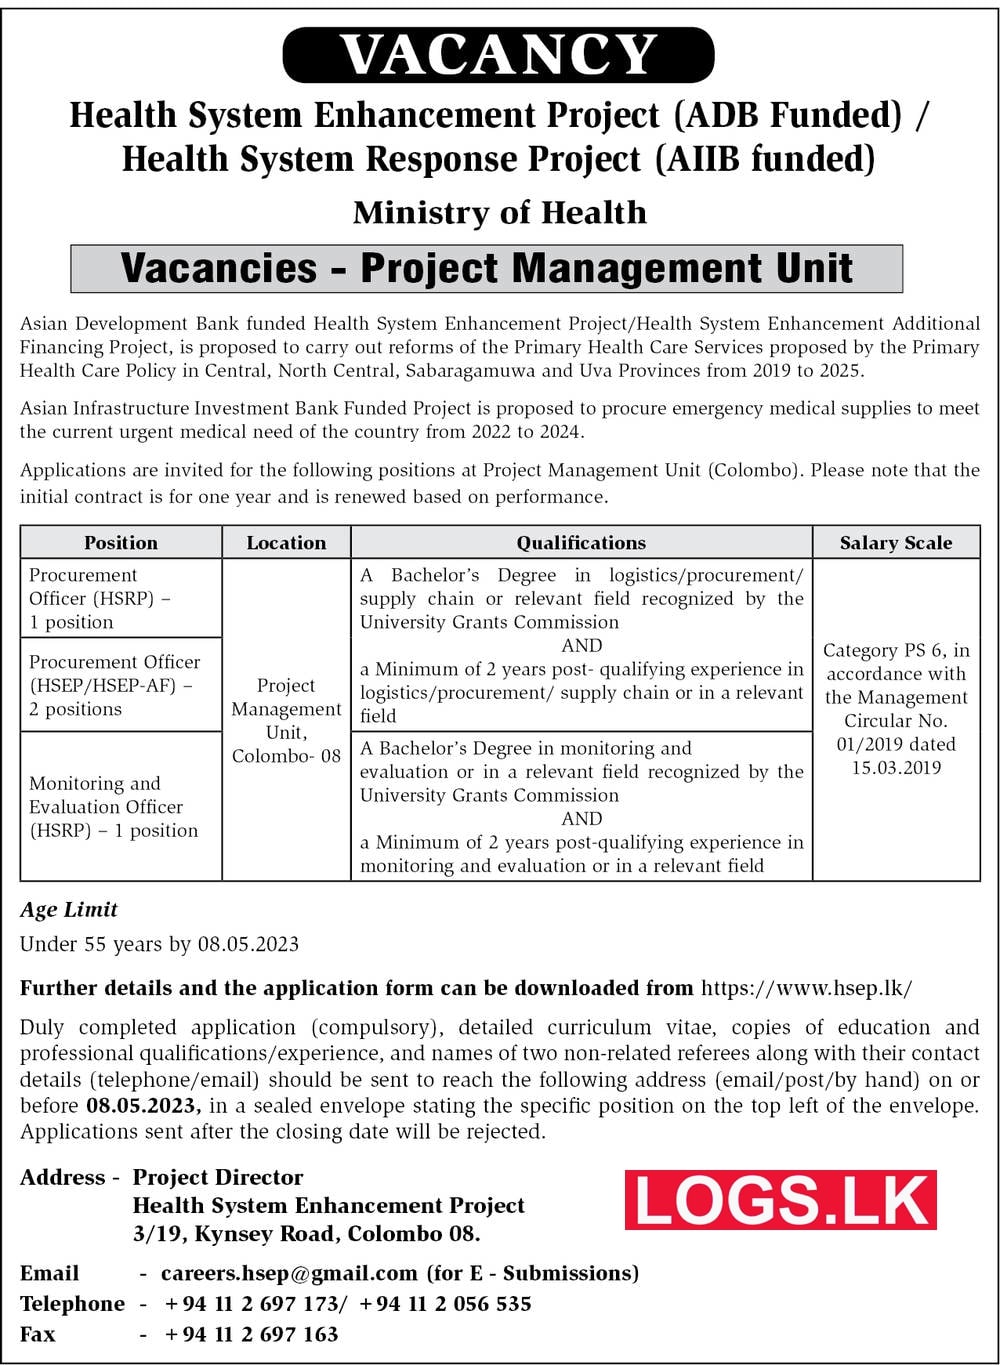 Procurement Officer / Monitoring and Evaluation Officer - Health System Enhancement Project Vacancies 2023 Application Form, Details Download